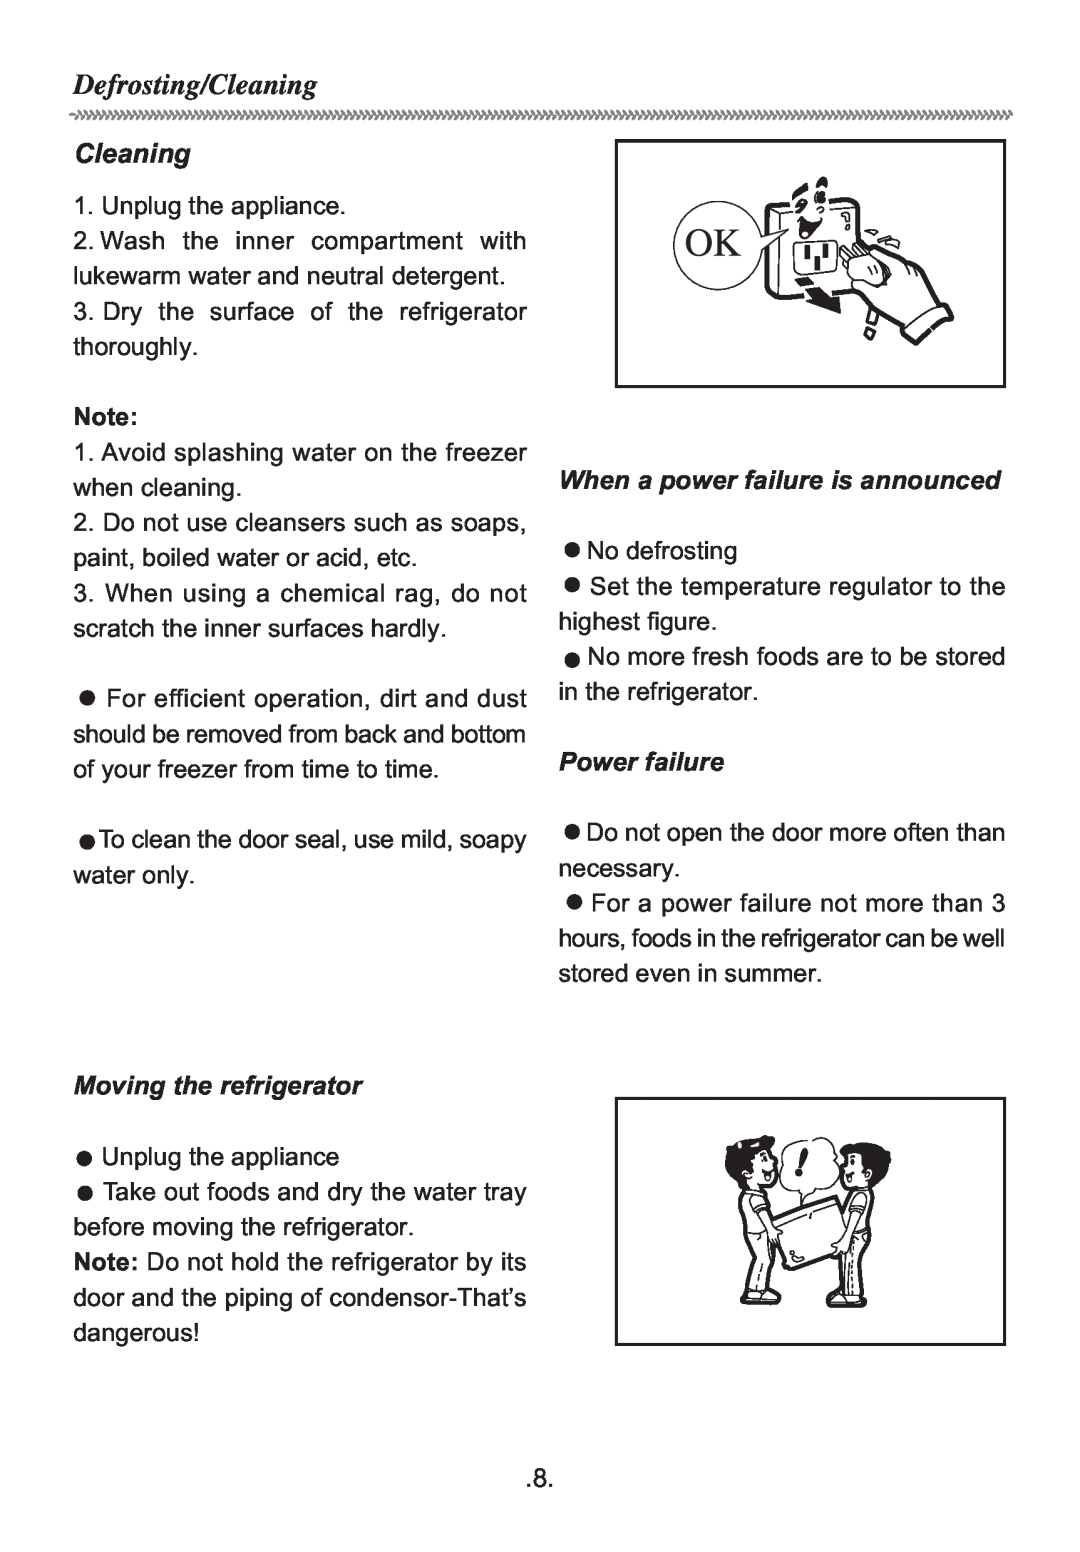 Haier HR-195S manual When a power failure is announced, Power failure, Moving the refrigerator, Defrosting/Cleaning 